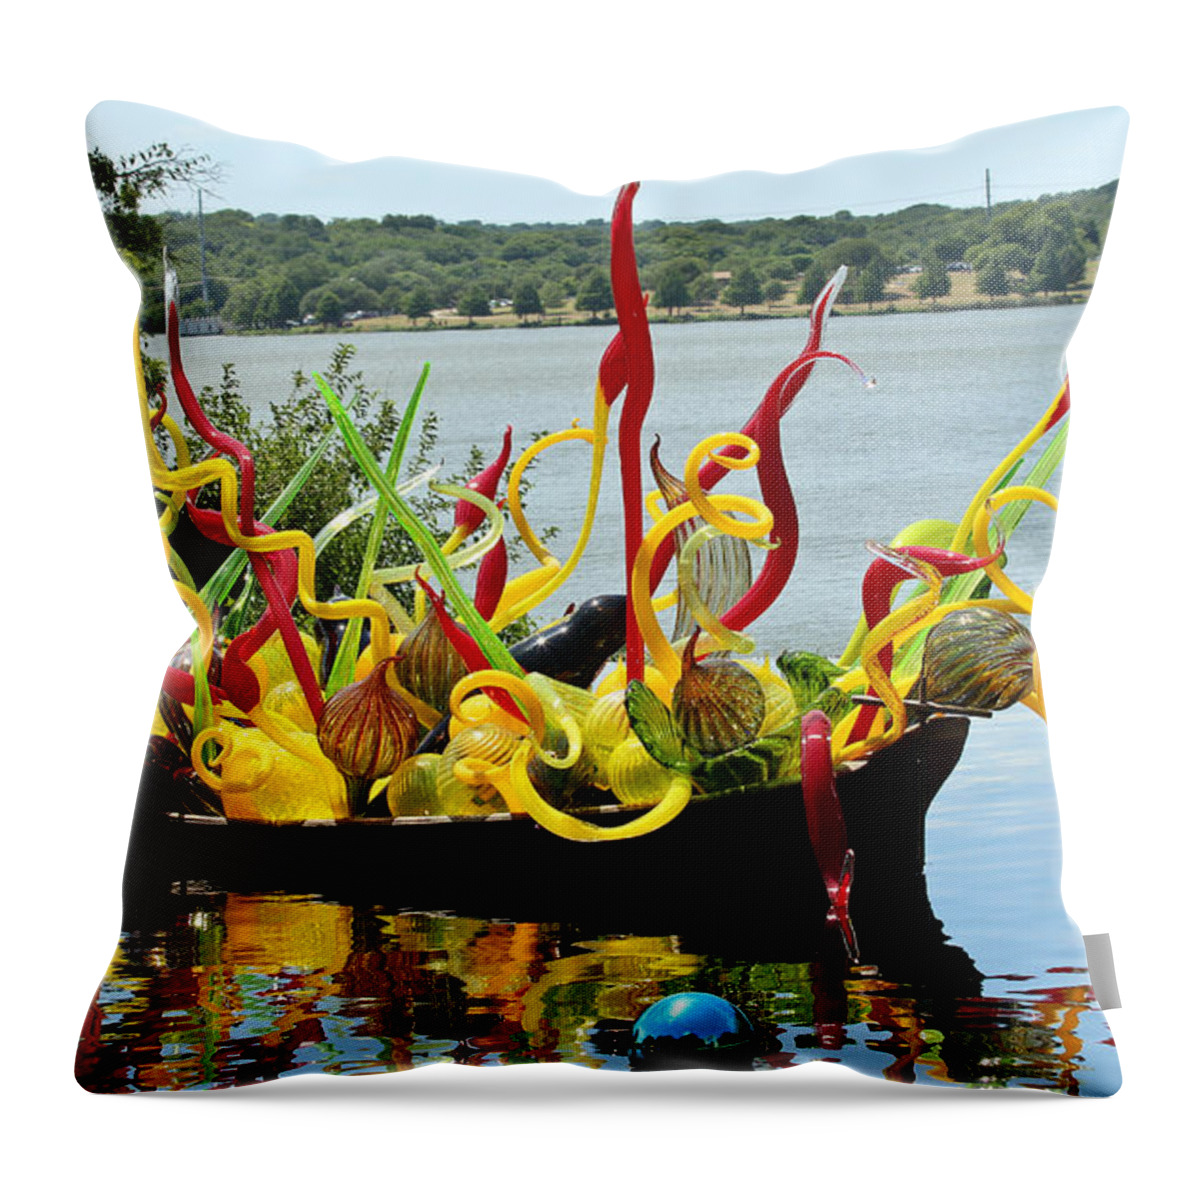 Ball Throw Pillow featuring the photograph Party Boat by Elizabeth Hart